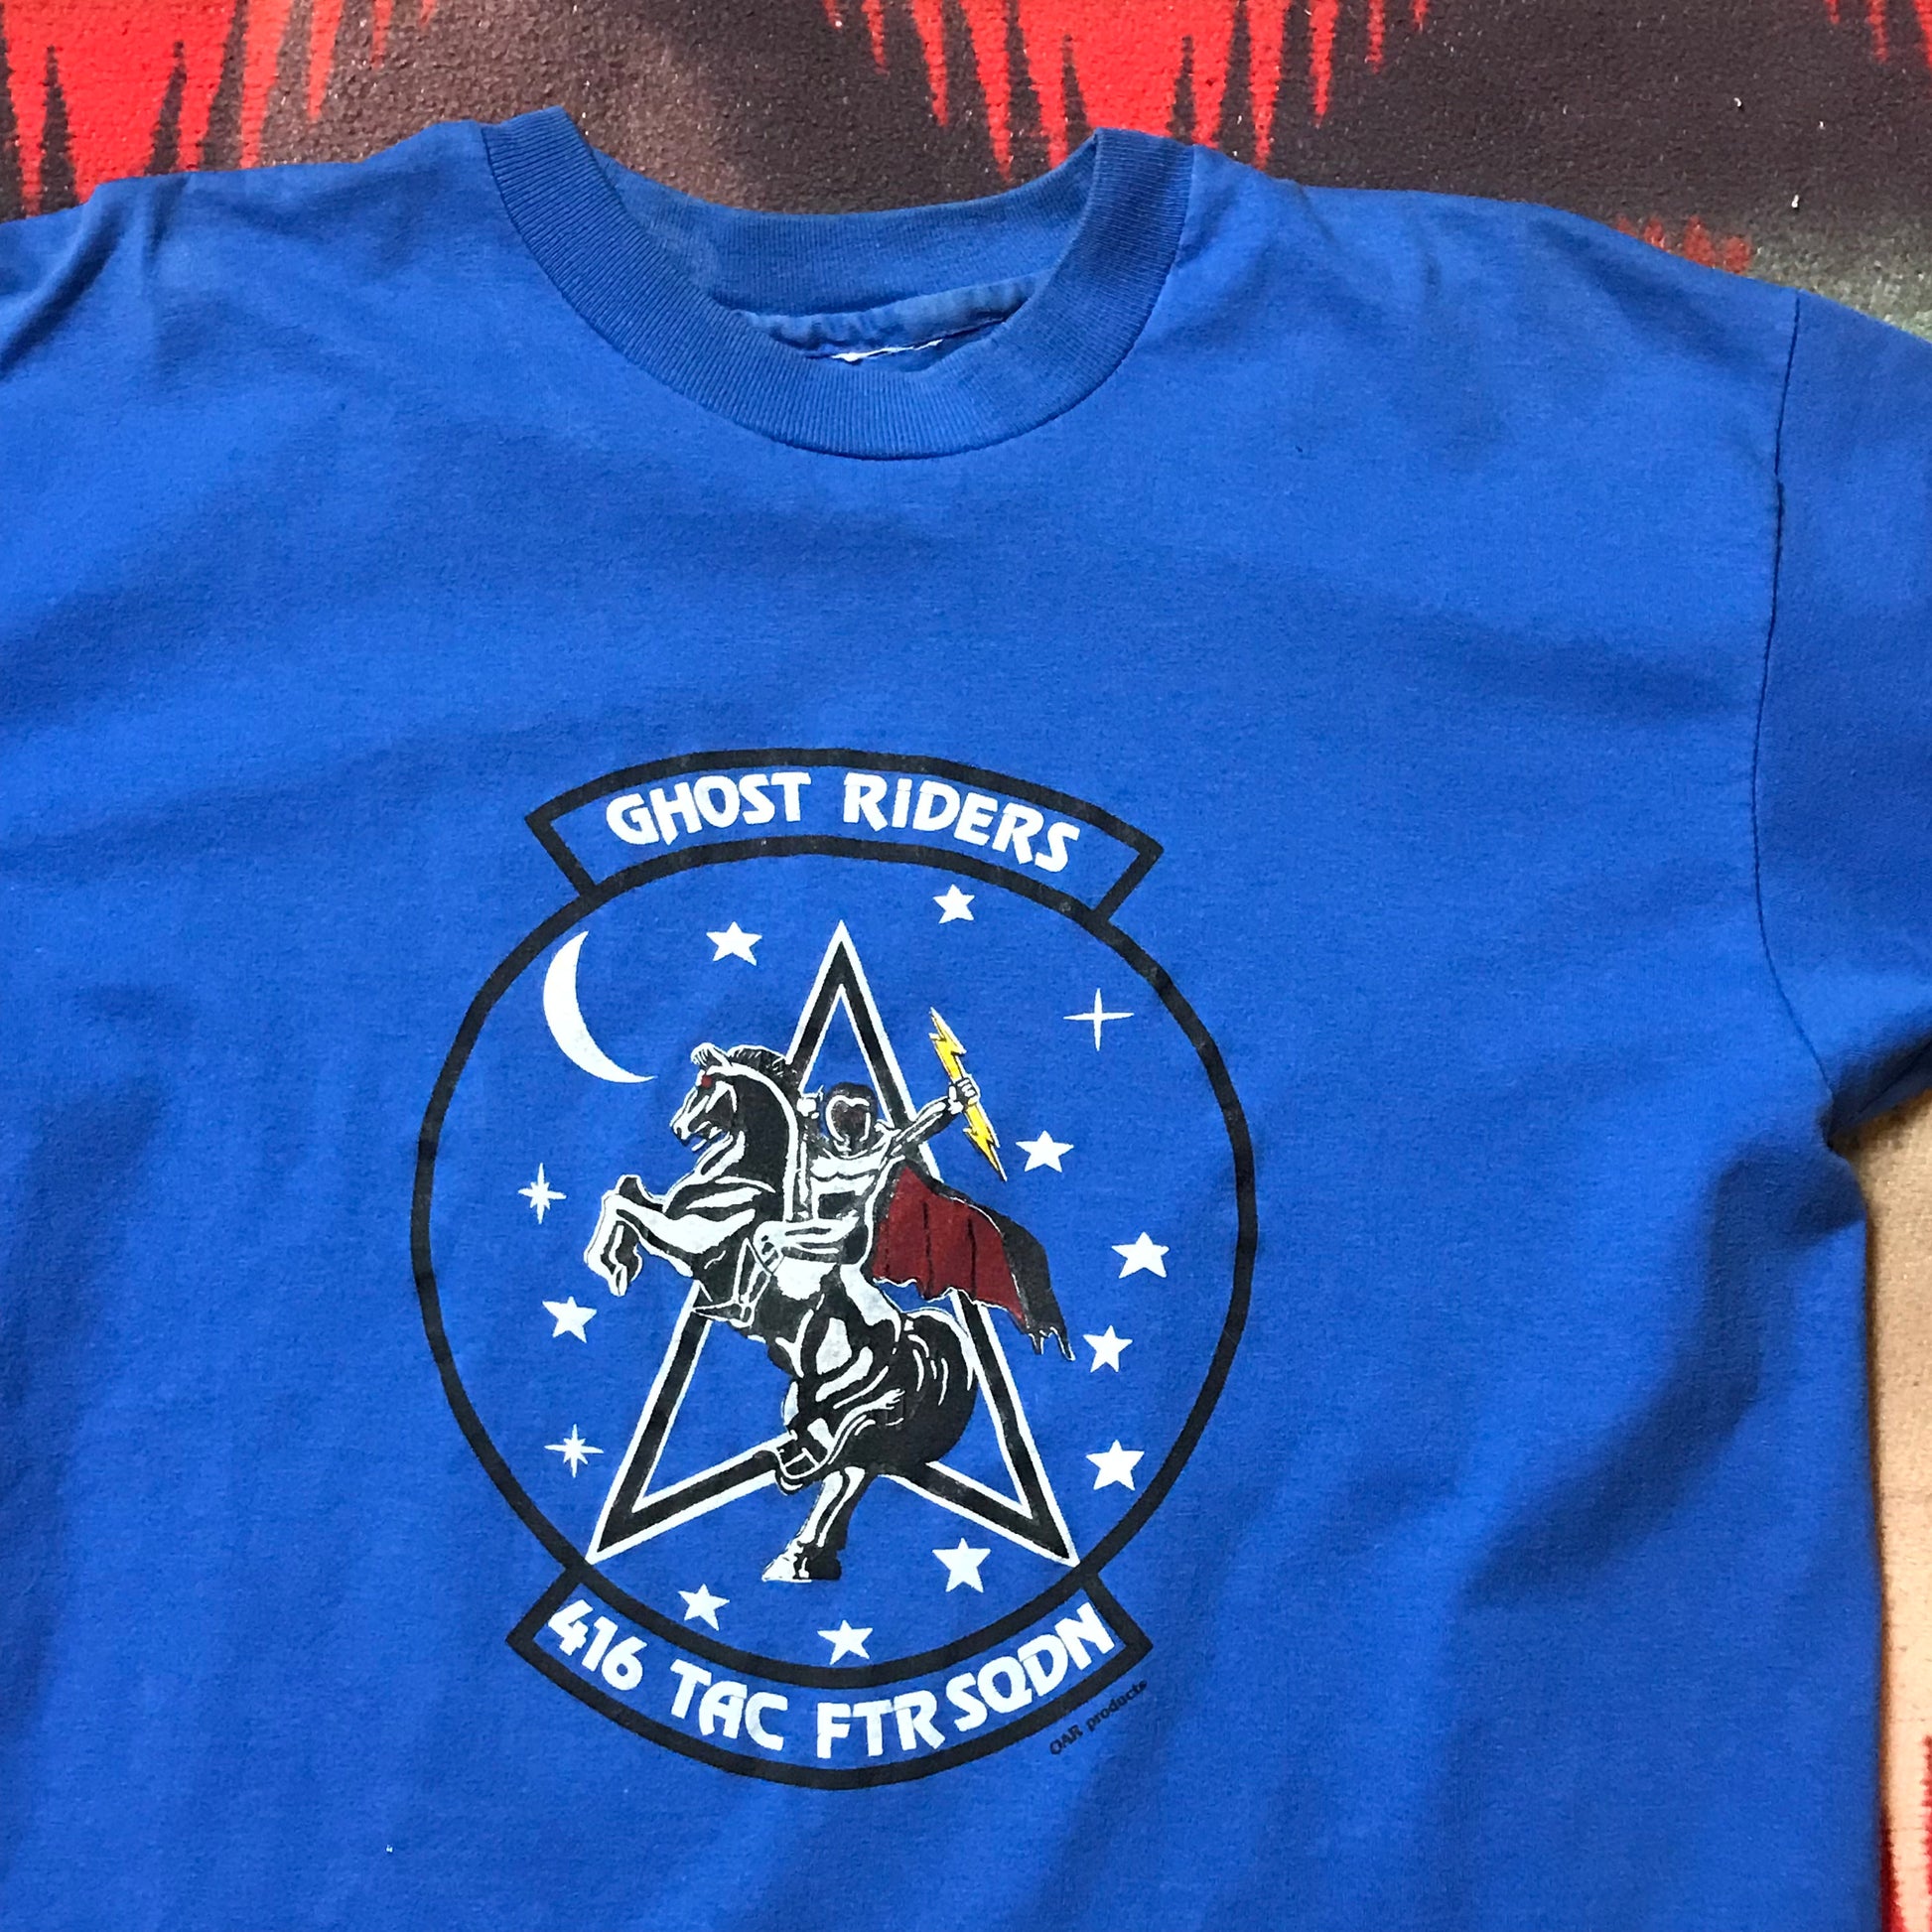 1980s/1990s USAF 416th Tactical Fighter Squadron Ghost Riders T-Shirt Size S/M